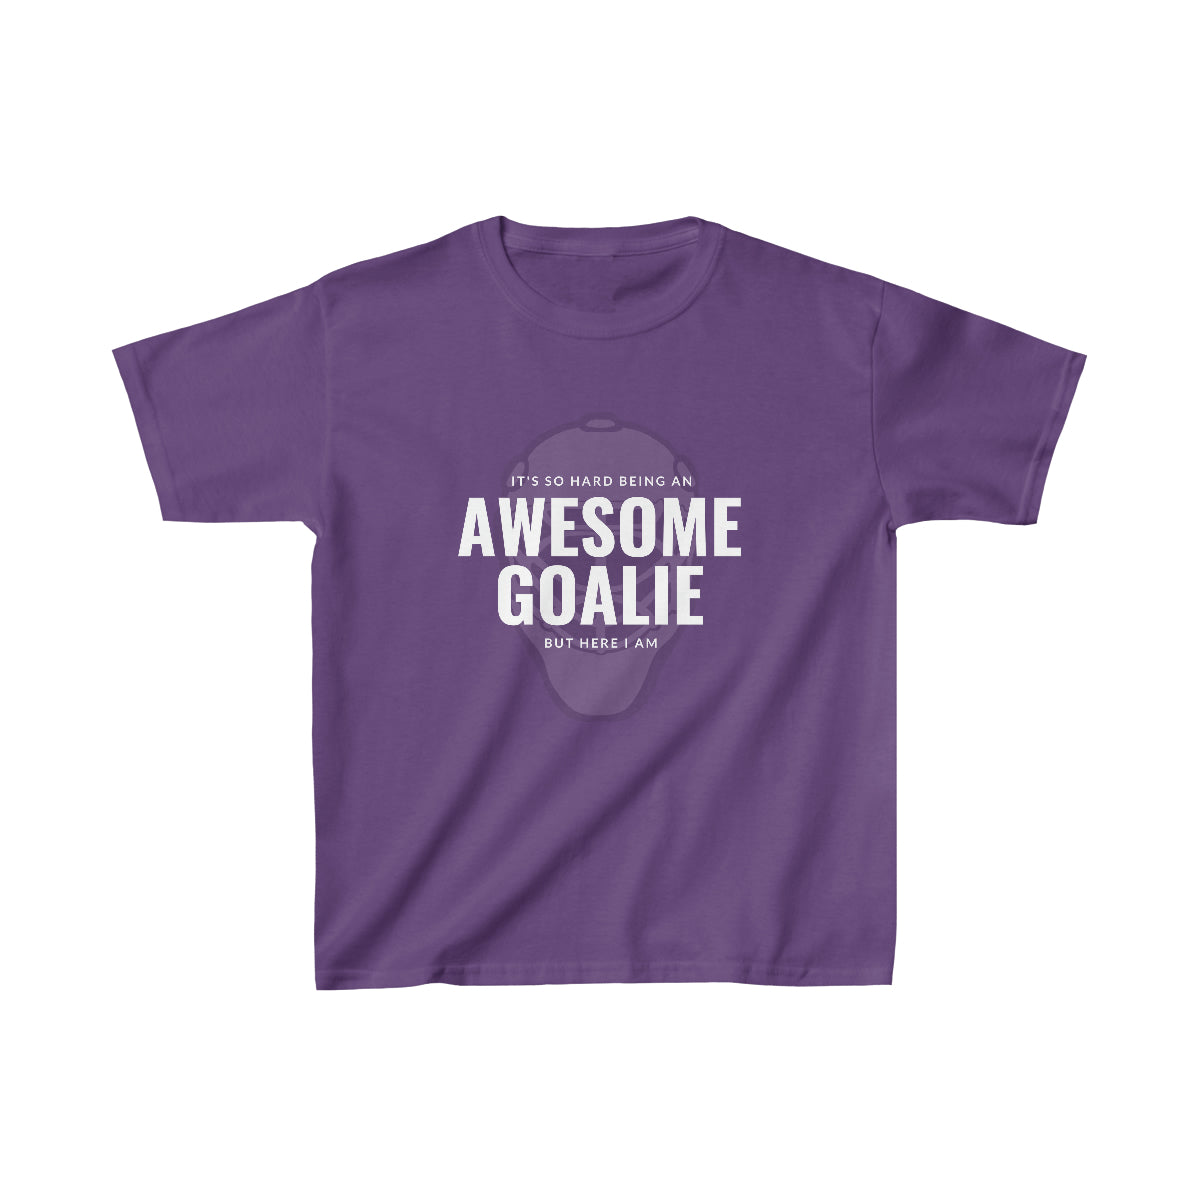 It's hard being an AWESOME GOALIE, but here I am - Youth Tee